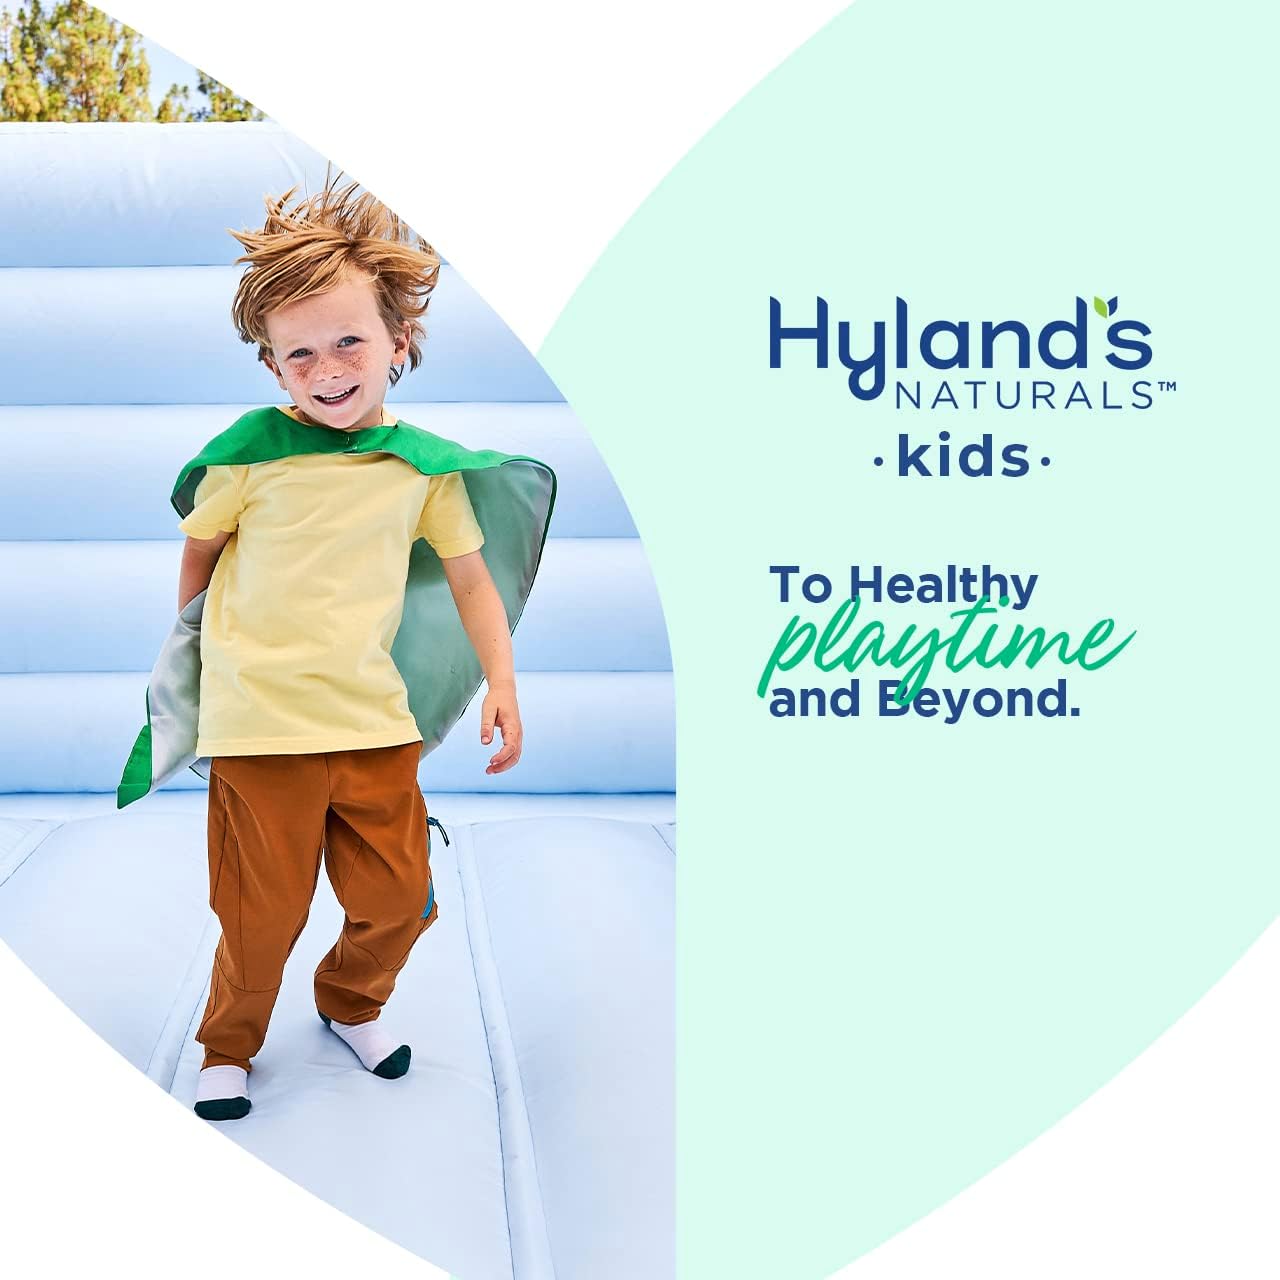 Hyland's Naturals Kids Cold & Cough, Nighttime Cough Syrup Medicine for Kids Ages 2+, Decongestant, Sore Throat, Allergy & Sleeplessness Relief of Common Cold Symptoms, 4 Fl Oz : Health & Household